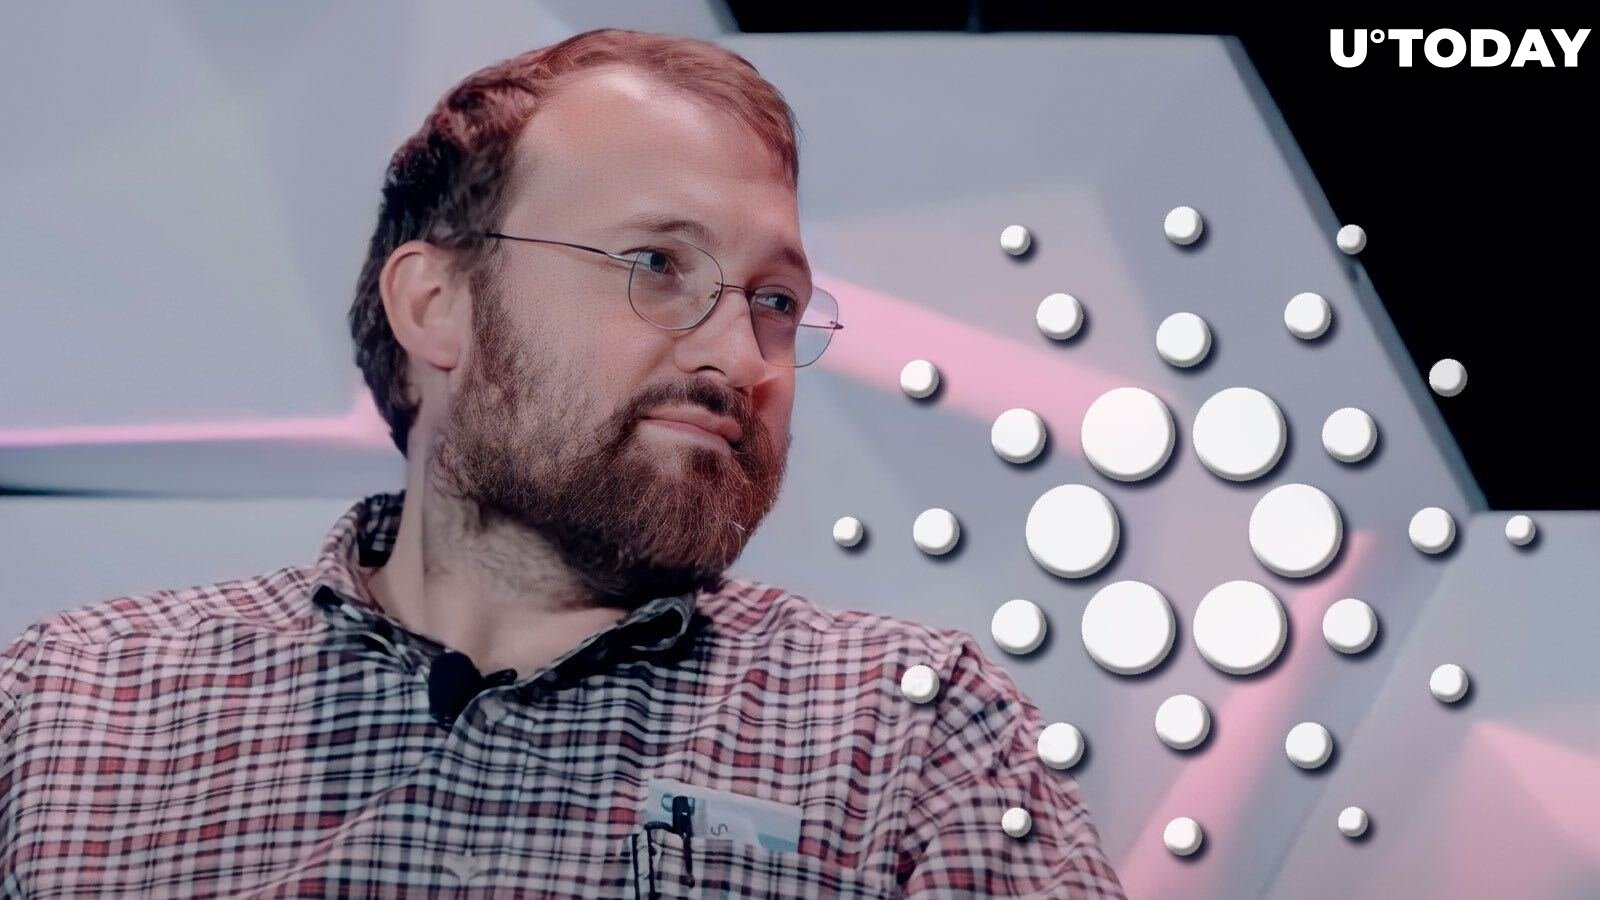 Cardano Founder Reacts to Cardano Being More Intimate Brand Than IKEA, BMW and Bitcoin